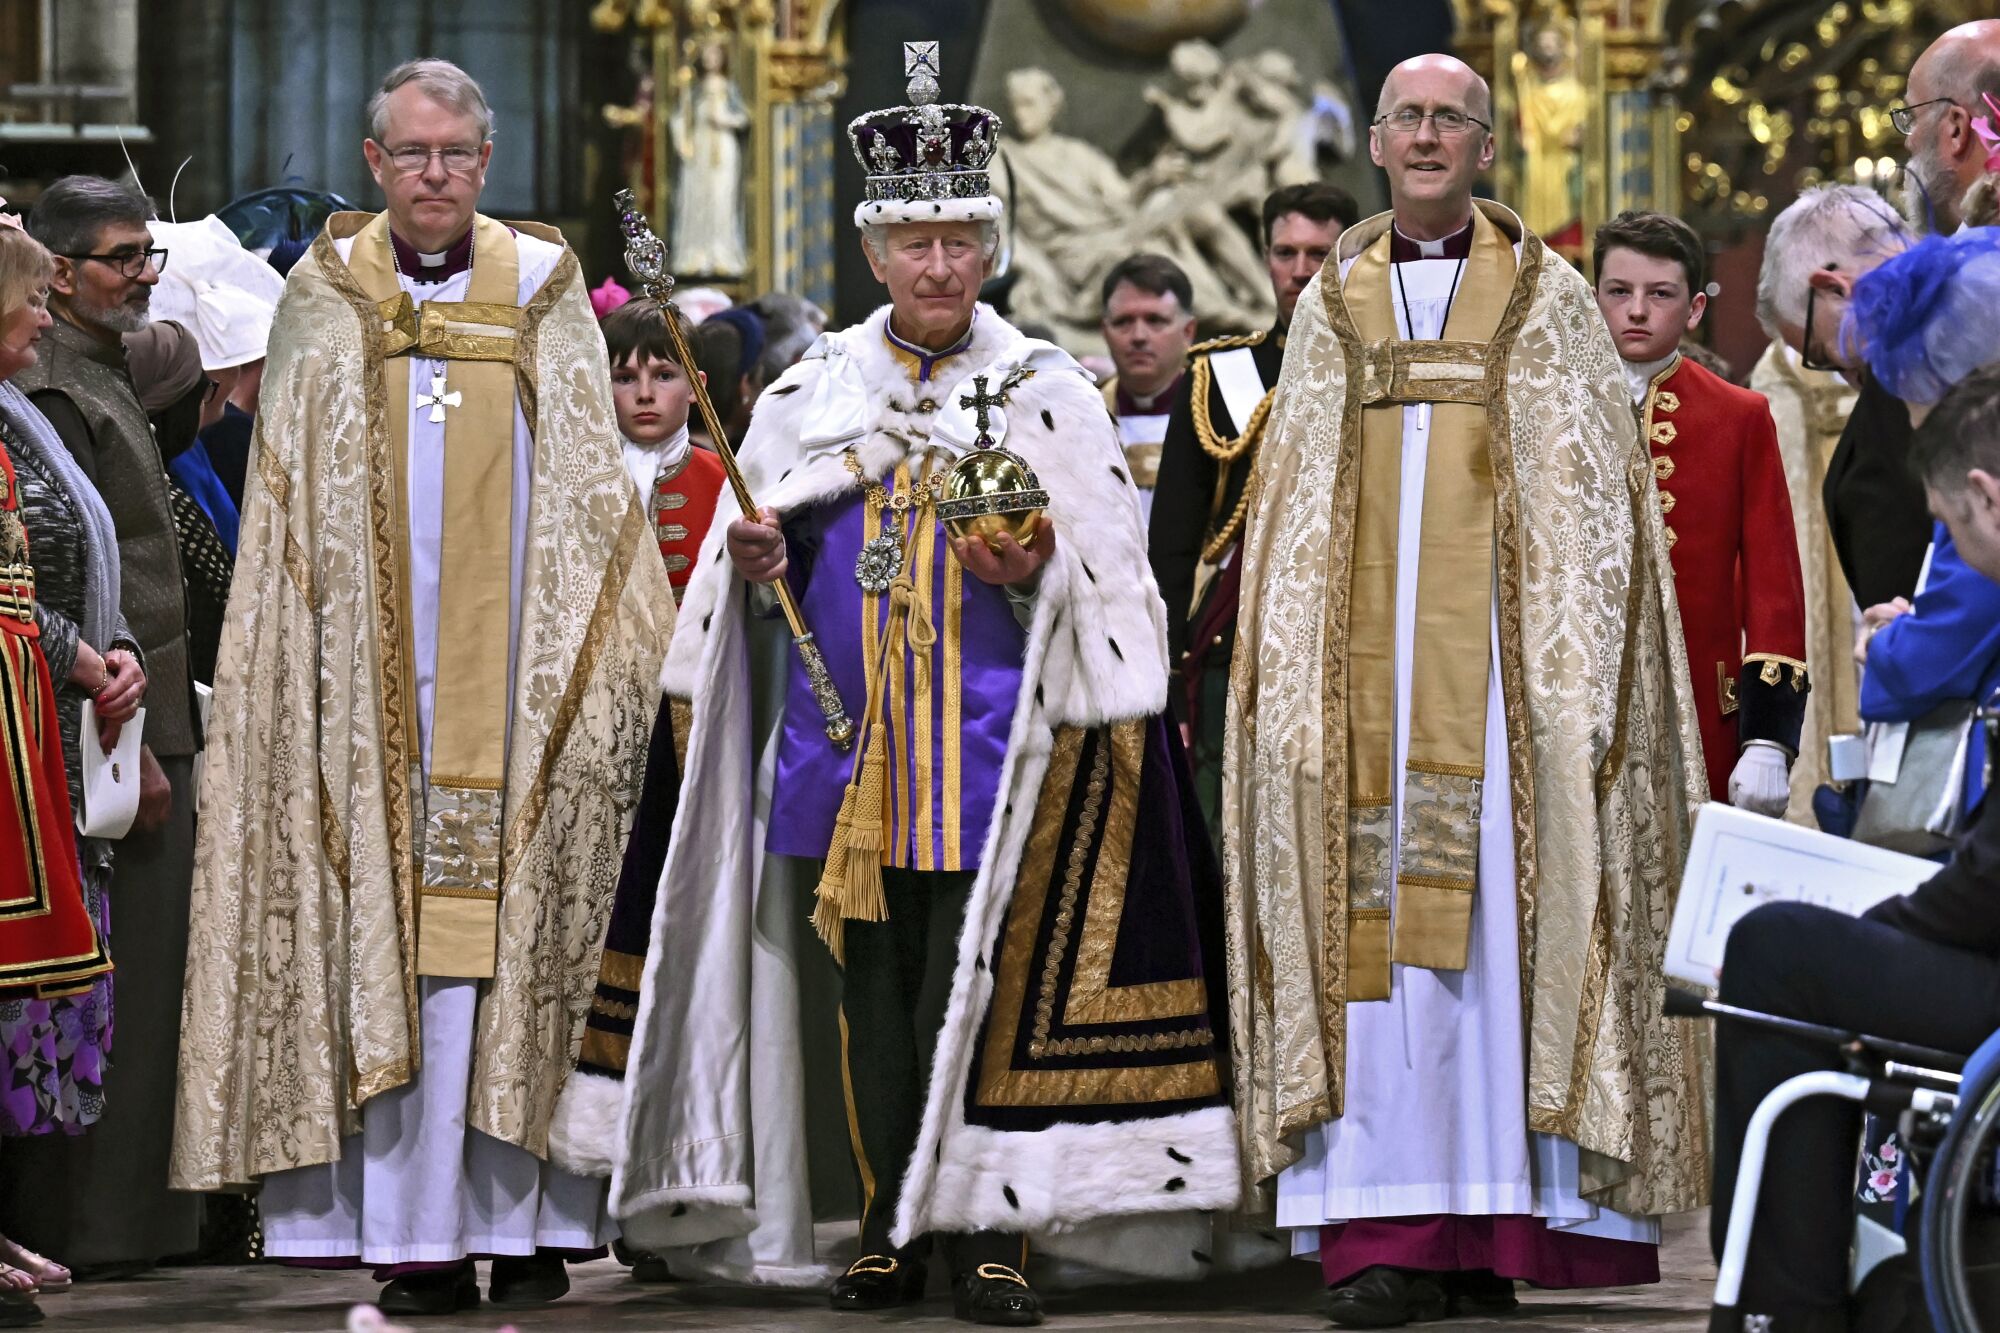 Flanked by priests, Britain's King Charles III leaves Westminster Abbey